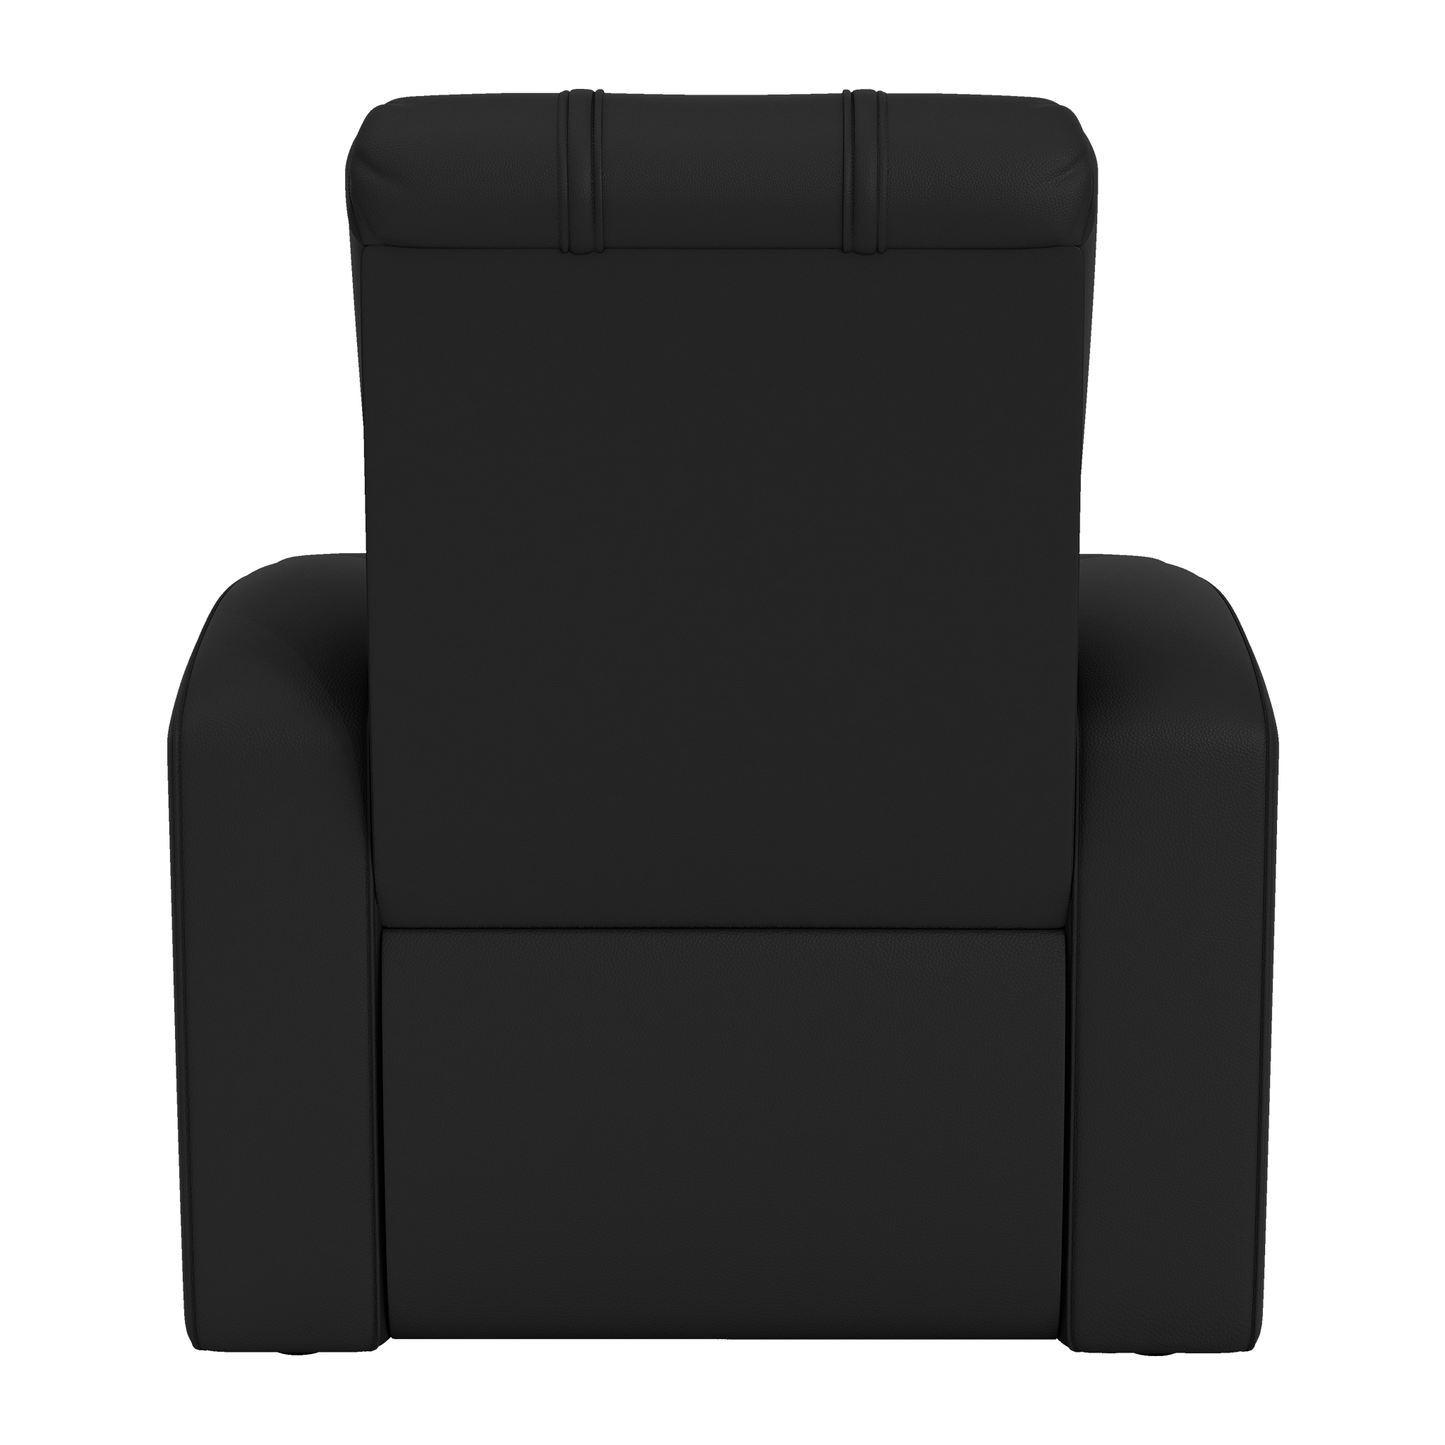 Relax Home Theater Recliner with  Carolina Panthers Helmet Logo